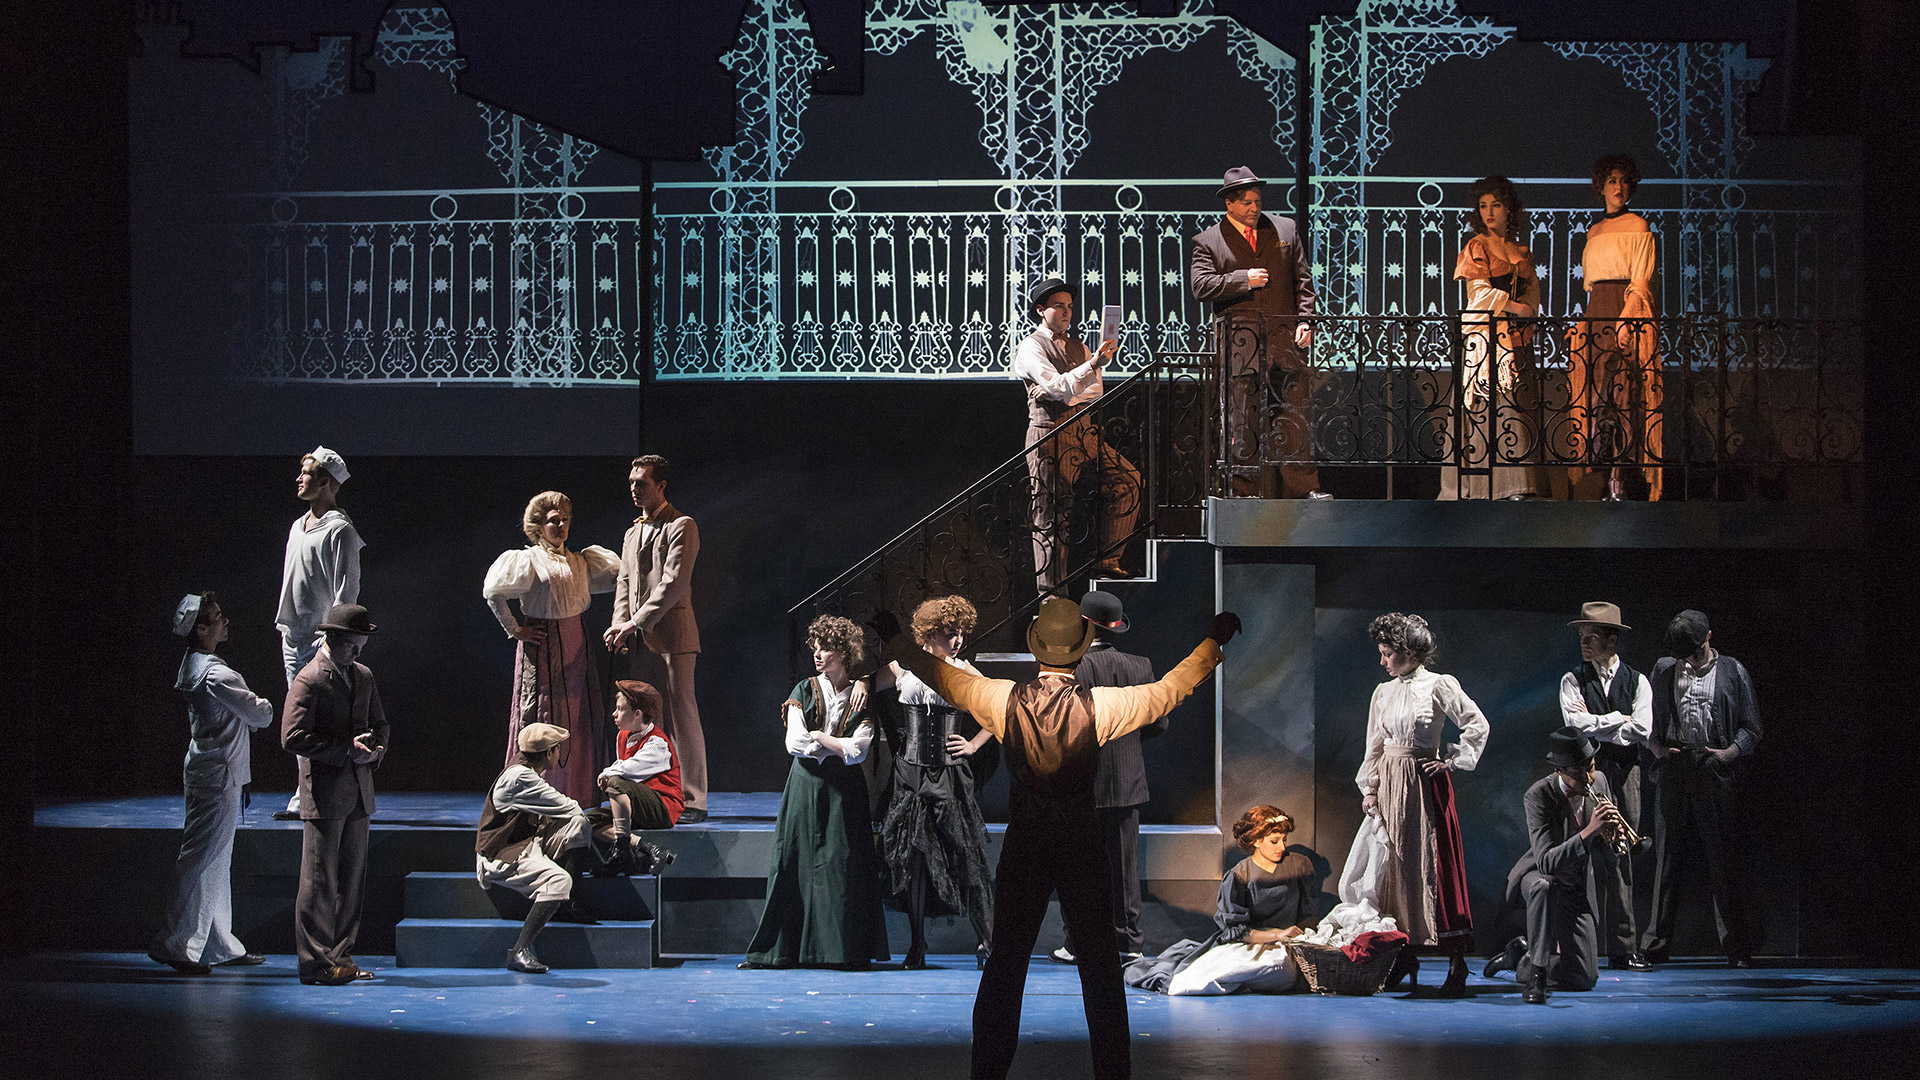 A large cast arranged across the stage with an iron work balcony.